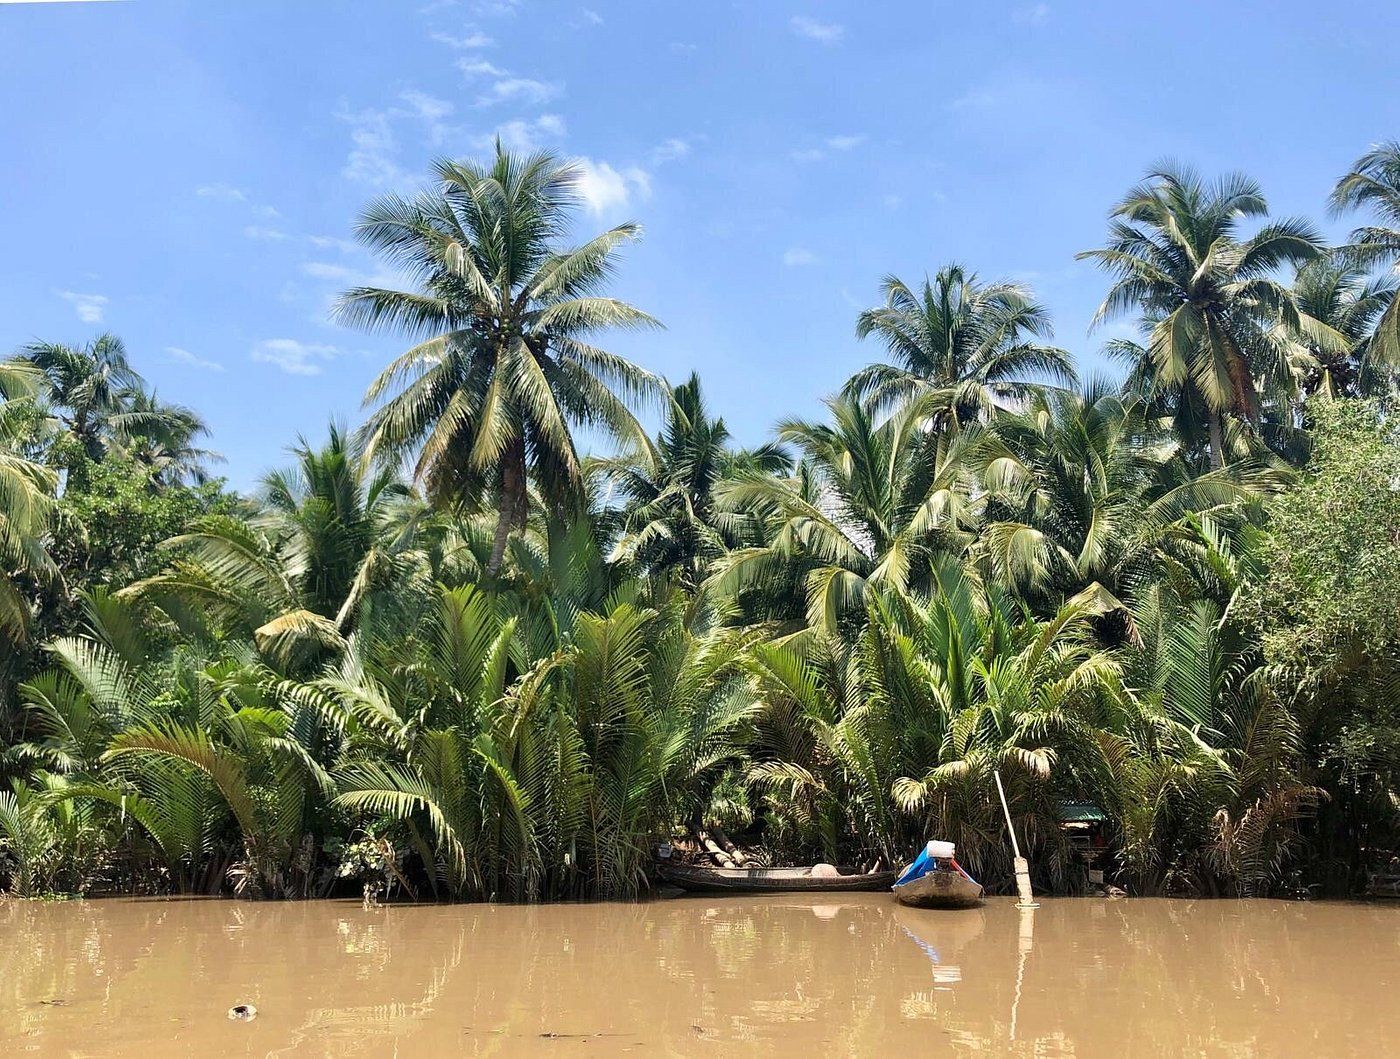 Full Day Mekong Delta Tour From Ho Chi Minh City